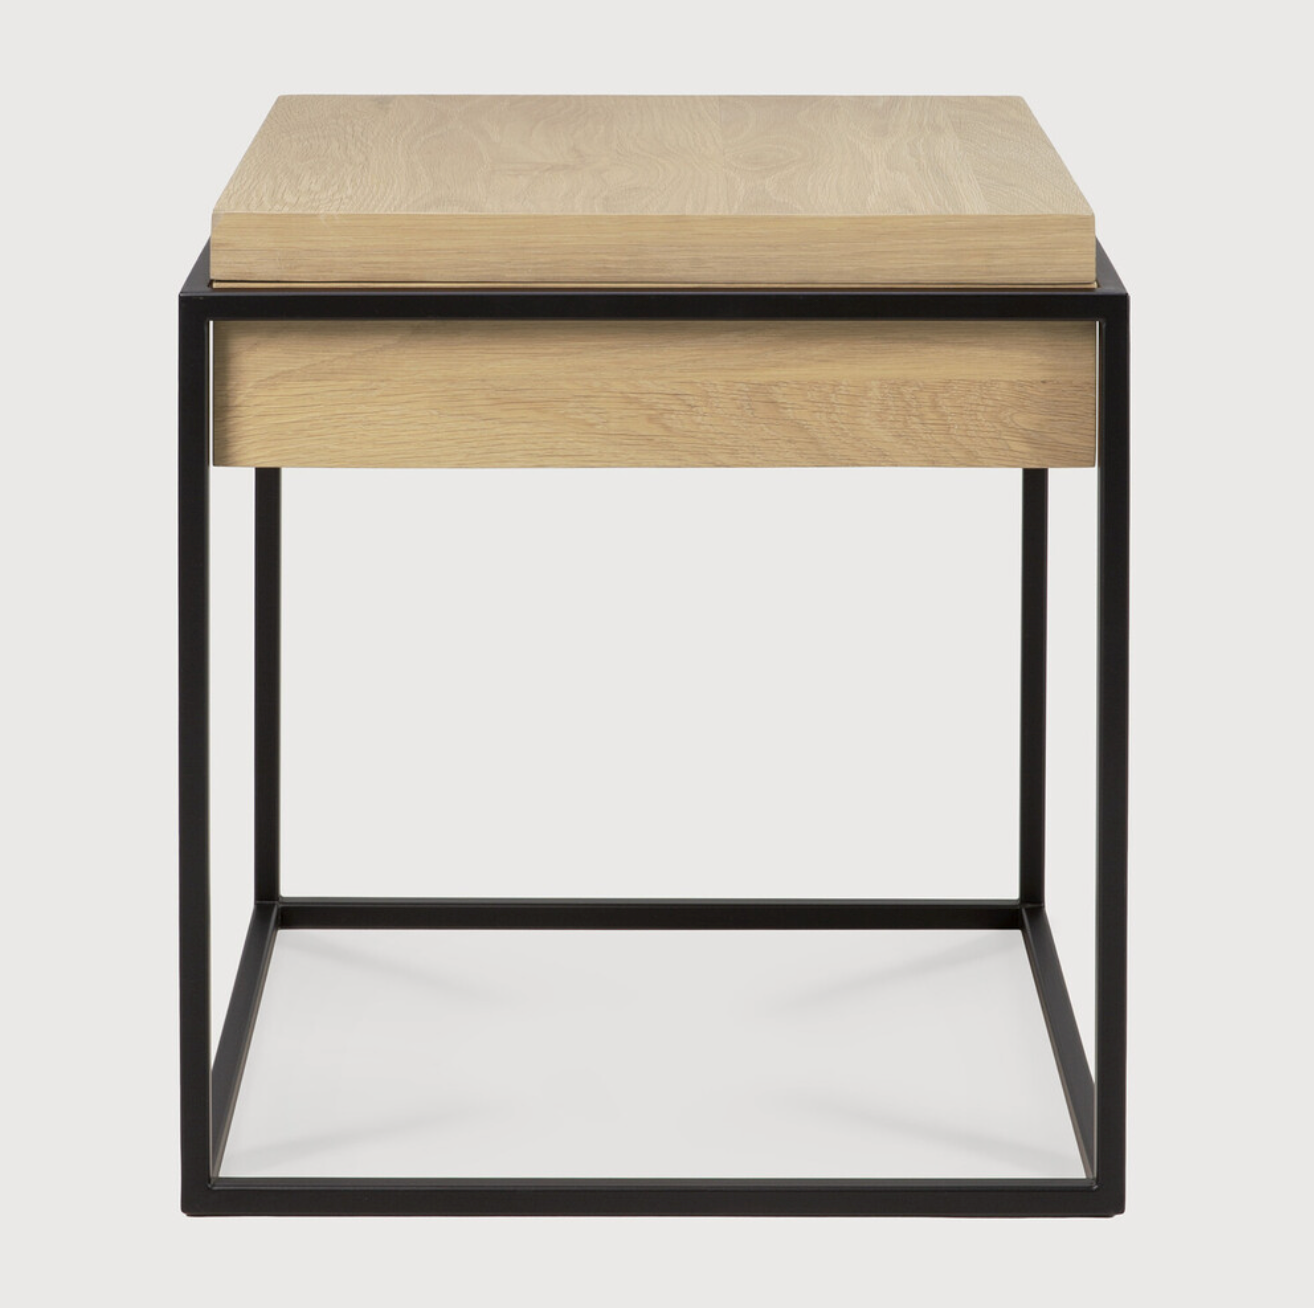 Balance and function come together in the Monolit side table. This simple, sleek table includes storage and we LOVE hidden storage! Dress up your living room or office with a piece that is both functional and stylish!  Dimensions: 19"w x 19"d x 20.5"h  Weight: 22 lbs  Material: Oak, 100% solid wood Finish: Oiled